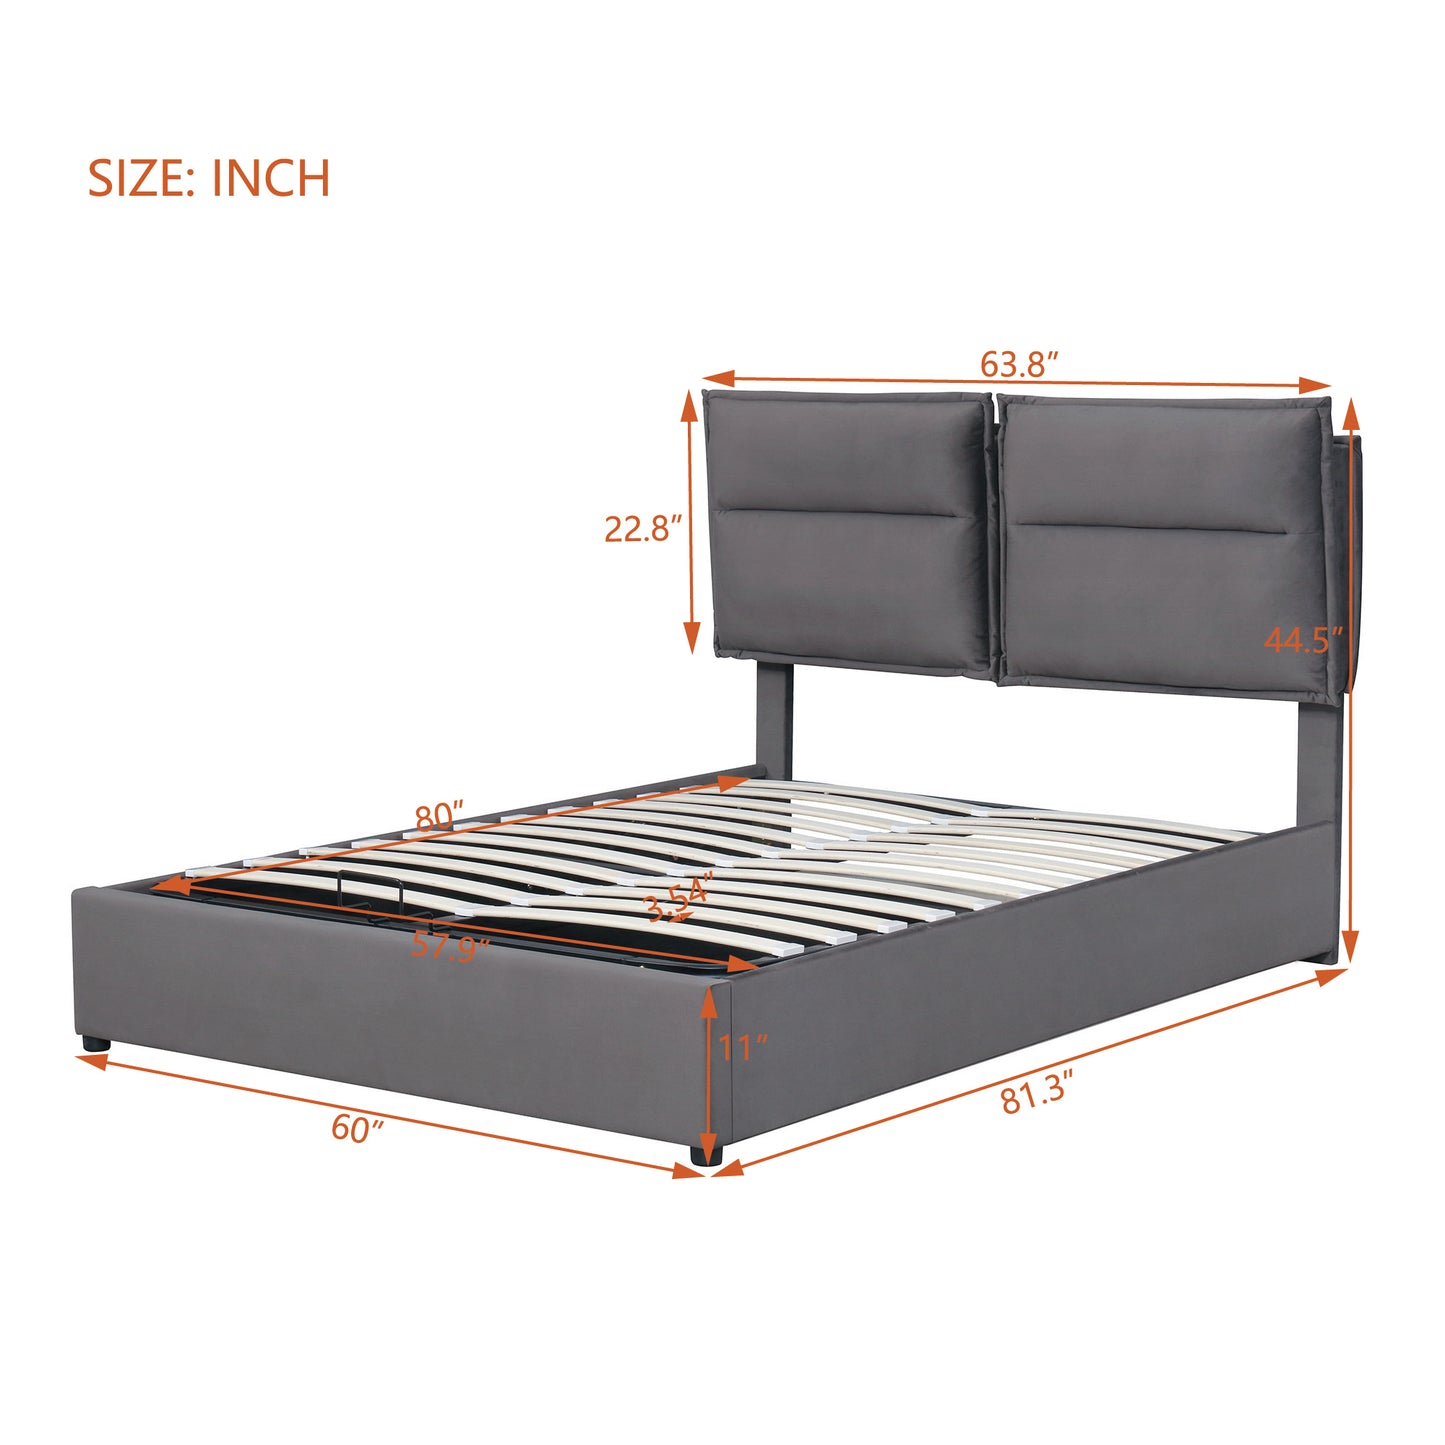 Upholstered Platform bed with a Hydraulic Storage System, Queen size, Gray